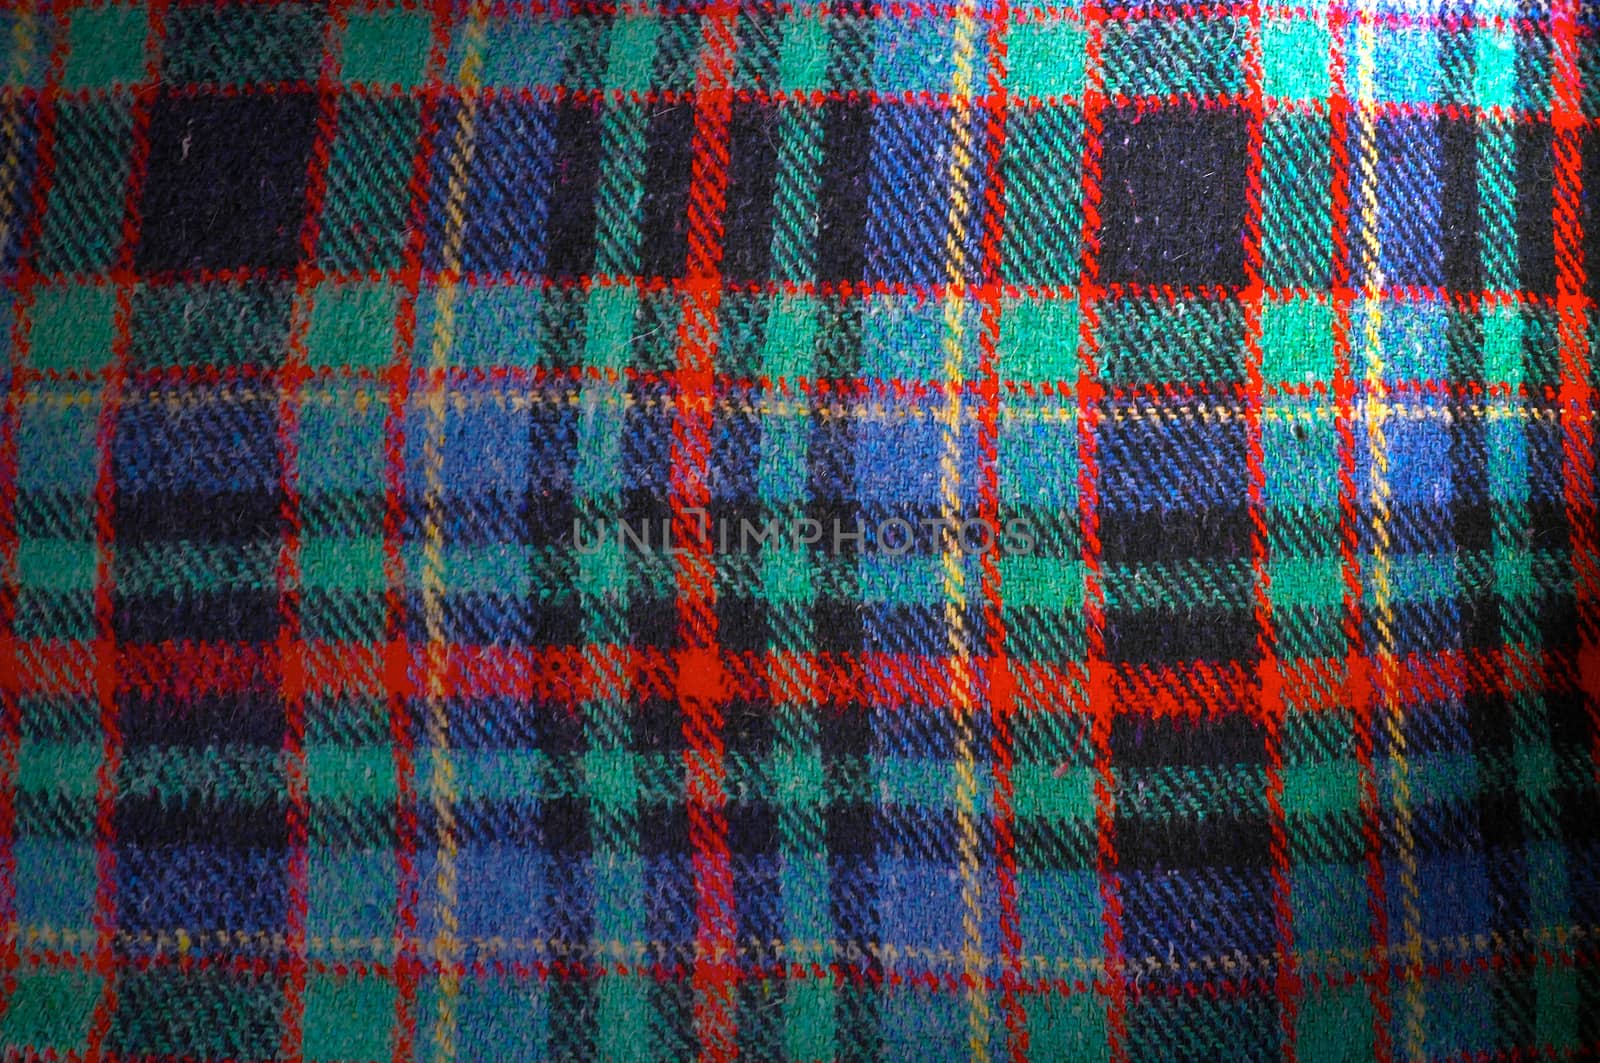 texture of knitted wool, with designs from the Scottish